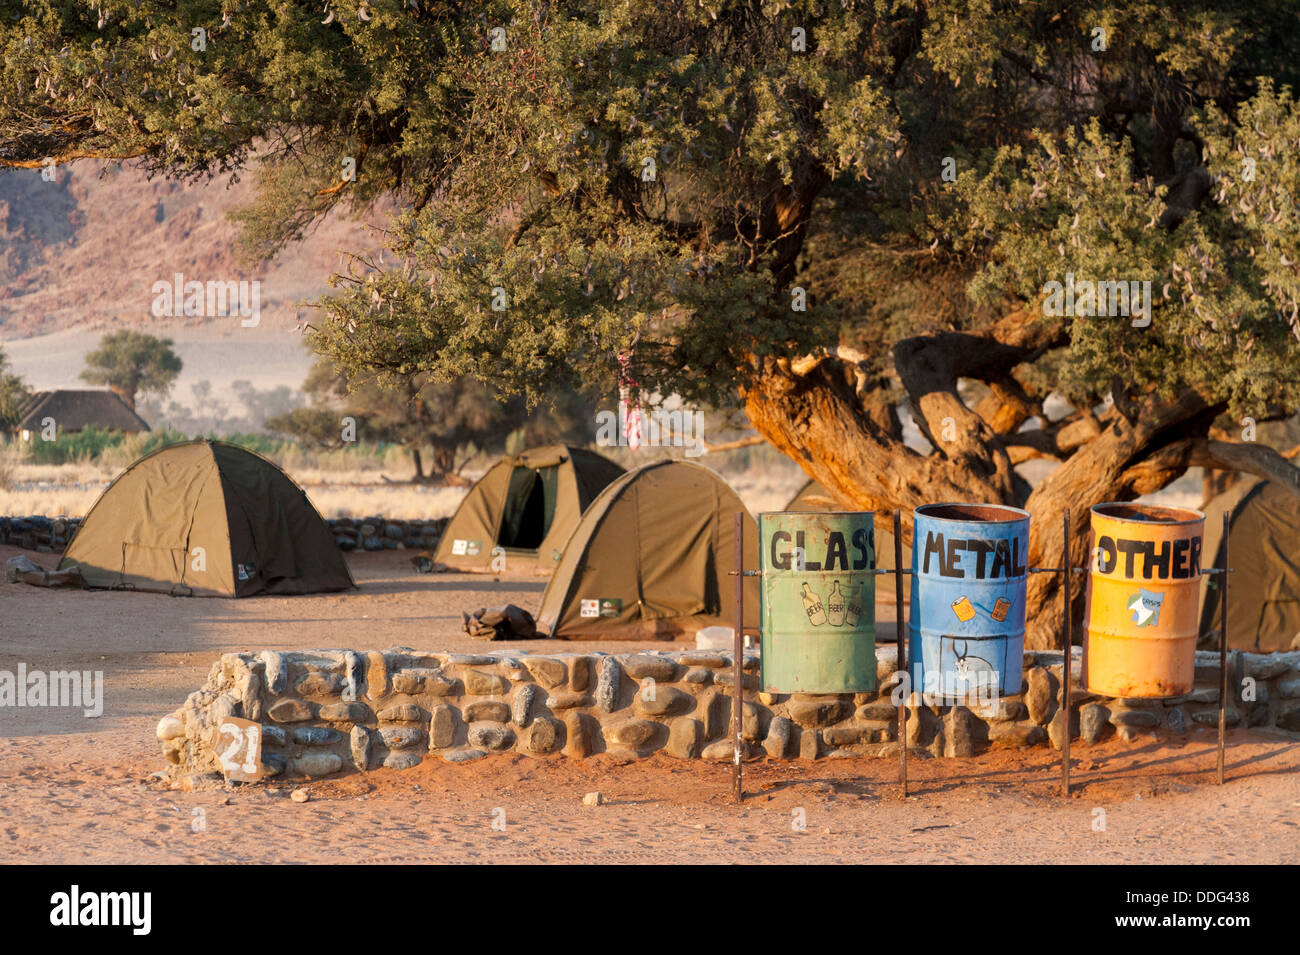 Recycling bins for glass, metal and other materials and tents at Sesriem campsite, Khomas region, Namibia Stock Photo